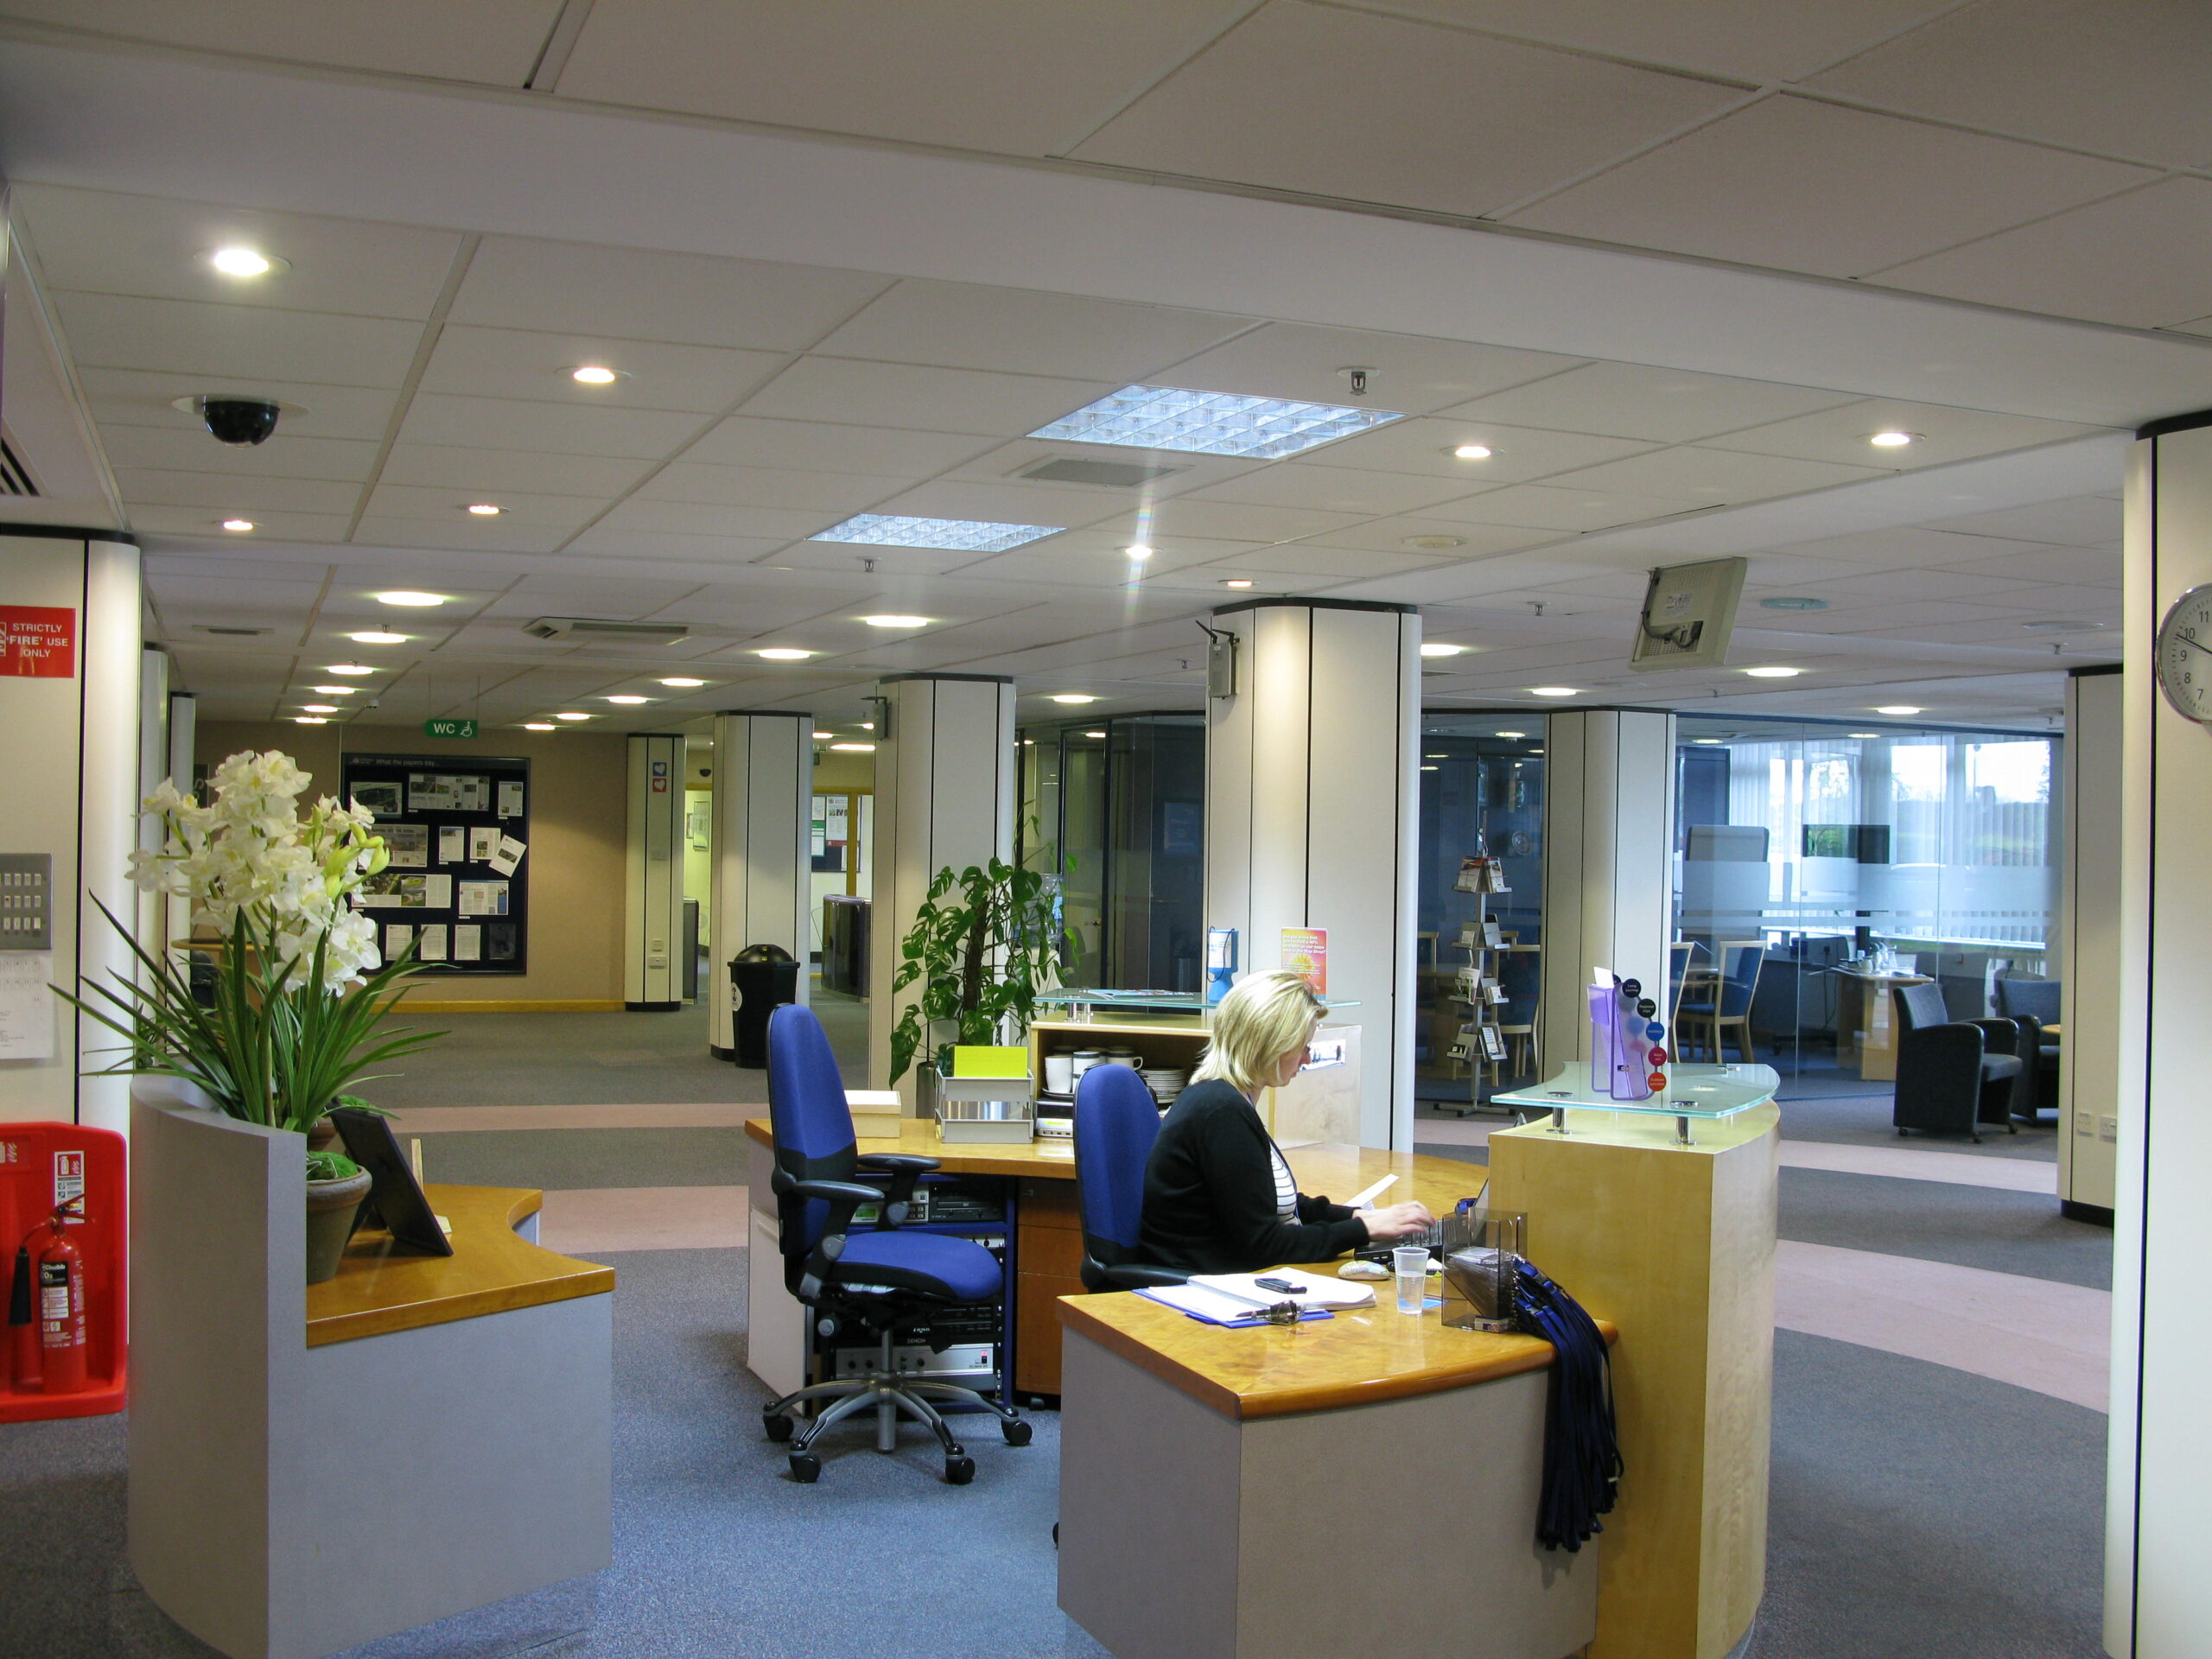 Reception – main desk and exit to the right.